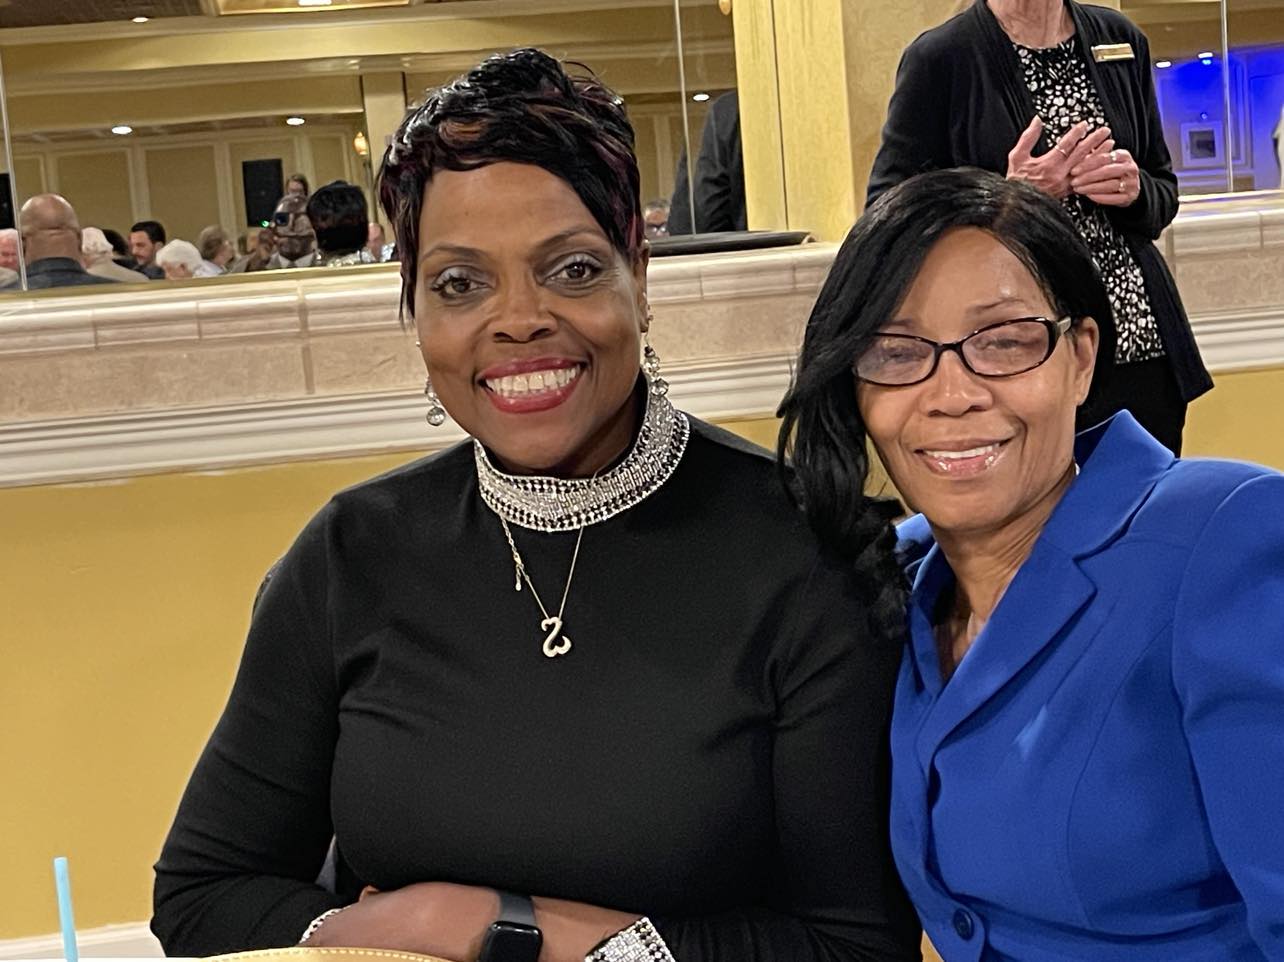 Pamela Palmer (Left) and Charmaine Hall (Right) attend Charter Night for the Atlantic City Kiwanis Club. Photo Credit: Mark Tyler